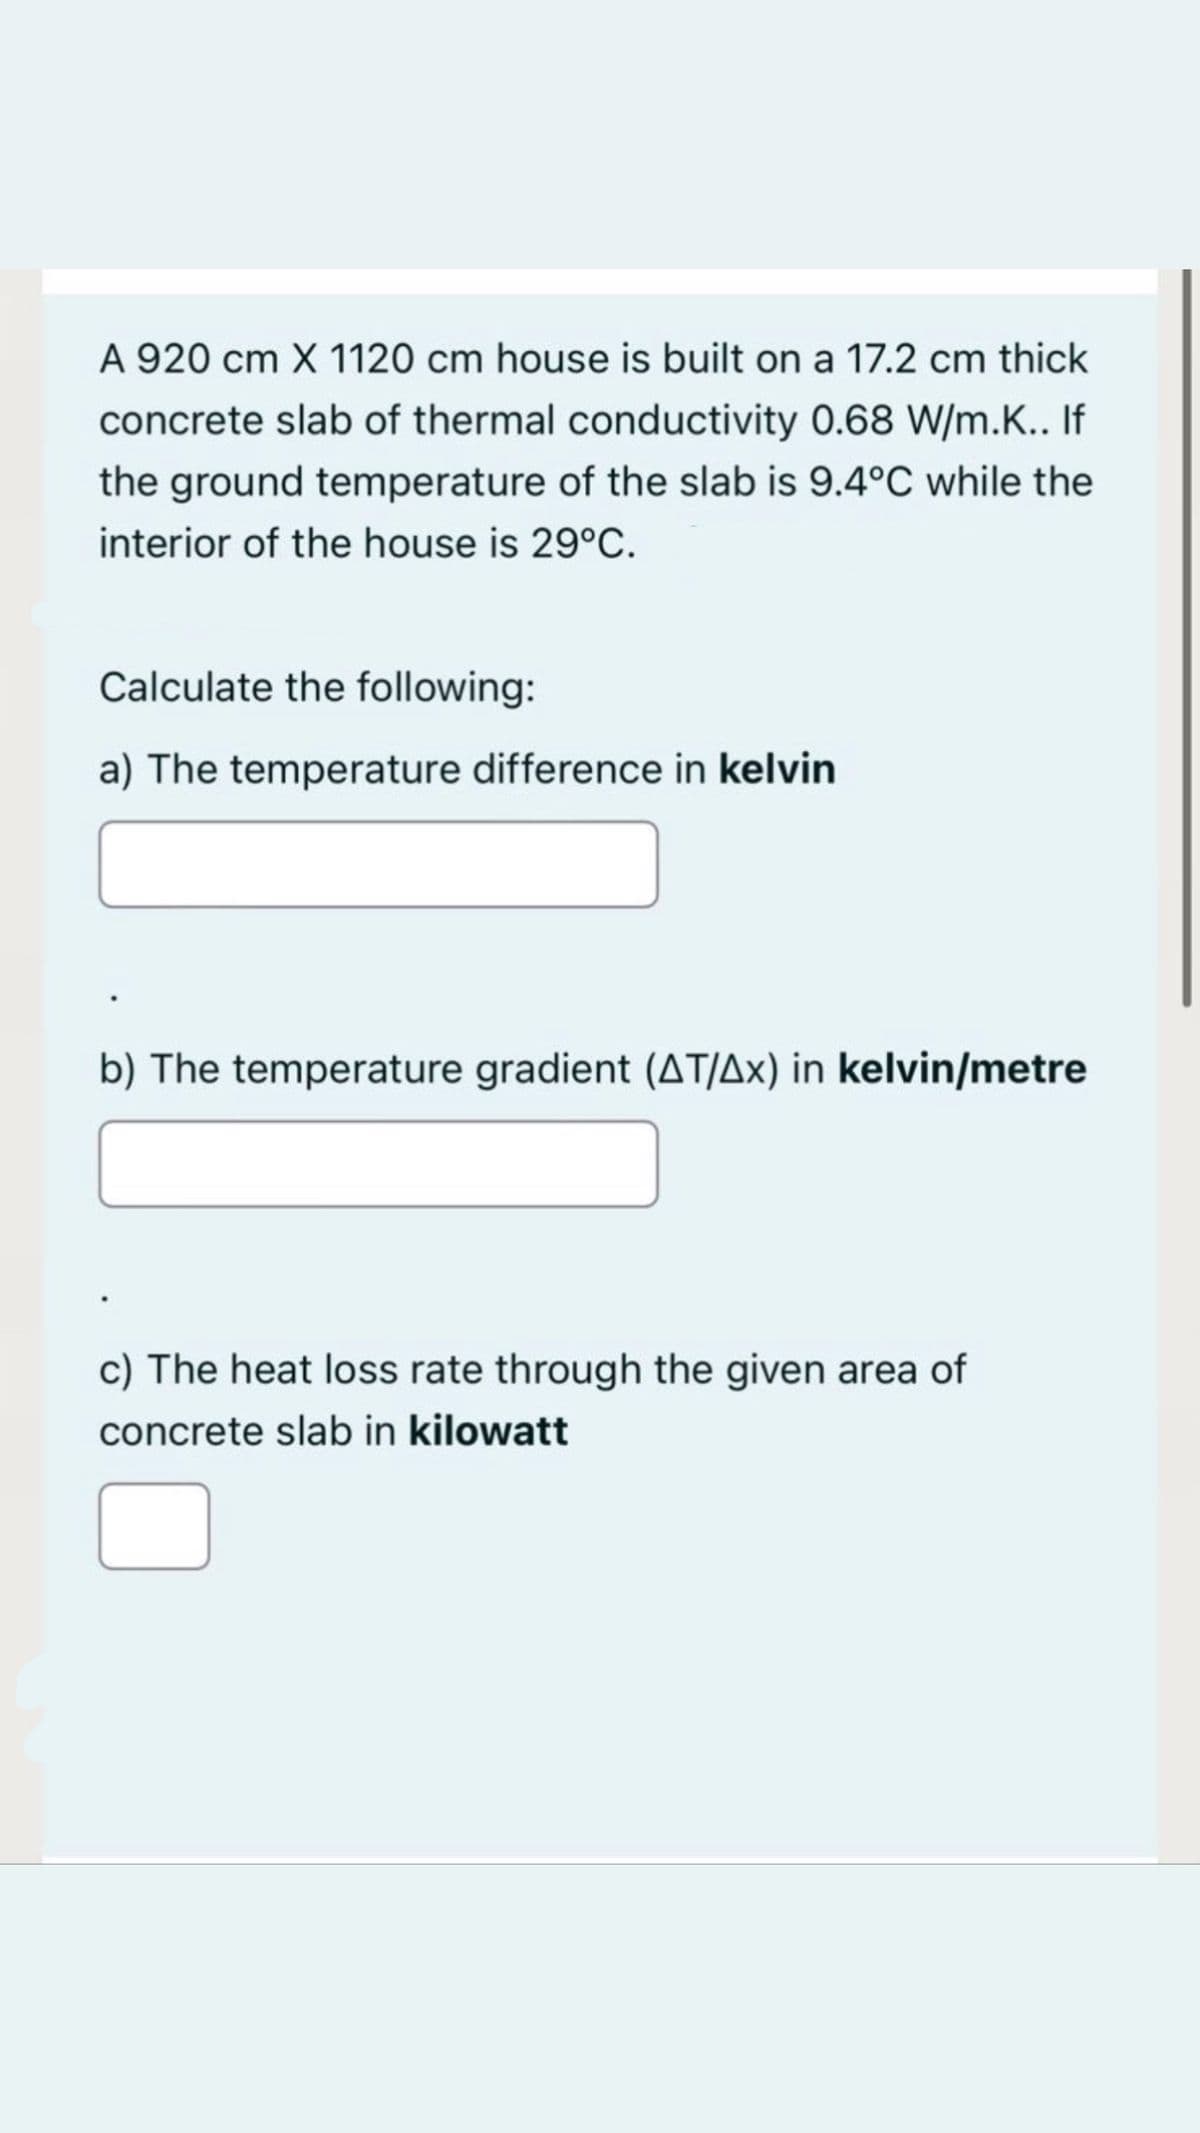 A 920 cm X 1120 cm house is built on a 17.2 cm thick
concrete slab of thermal conductivity 0.68 W/m.K.. If
the ground temperature of the slab is 9.4°C while the
interior of the house is 29°C.
Calculate the following:
a) The temperature difference in kelvin
b) The temperature gradient (AT/Ax) in kelvin/metre
c) The heat loss rate through the given area of
concrete slab in kilowatt
